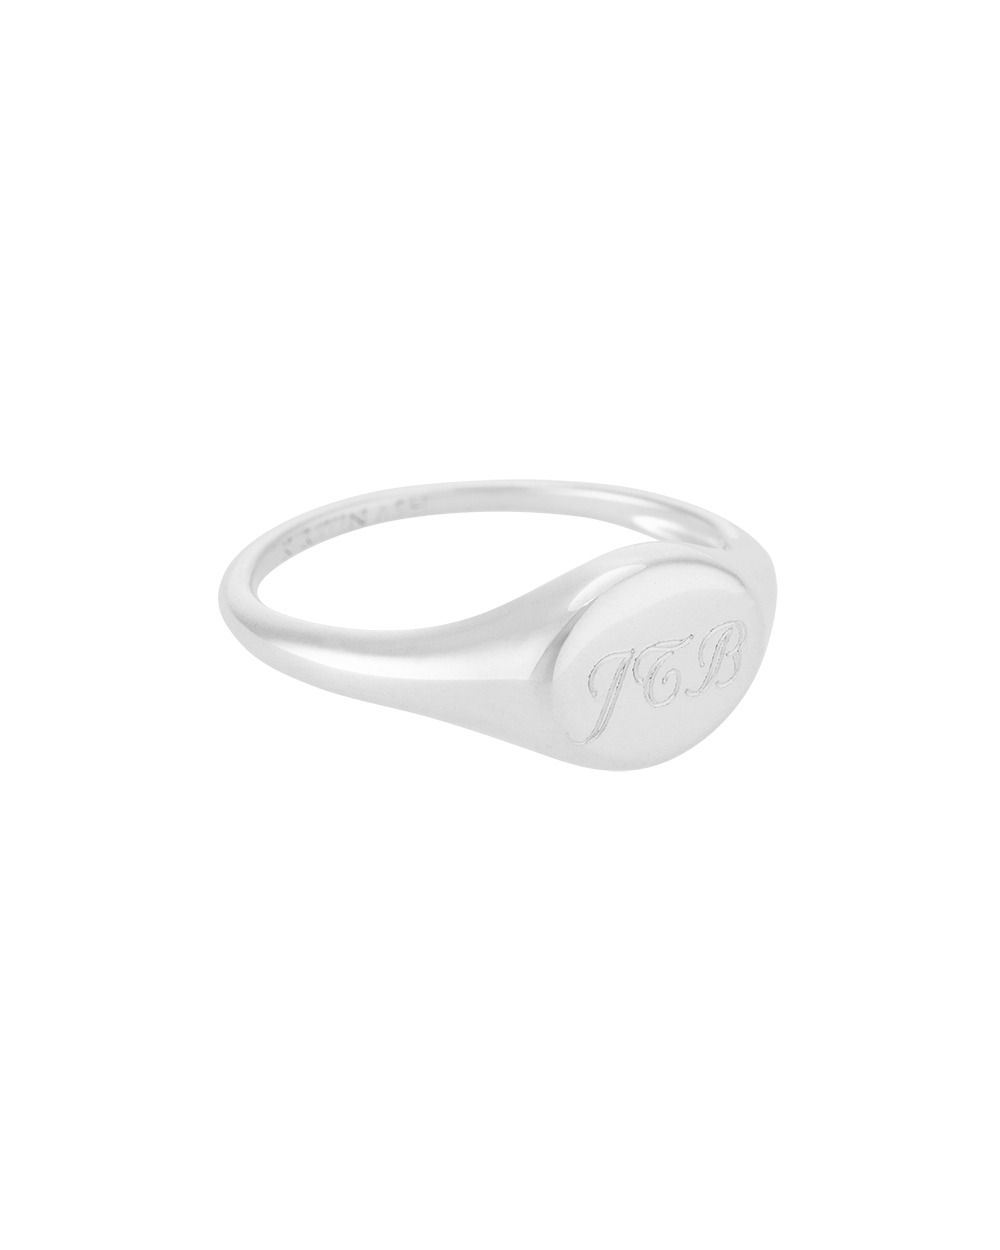 CLASSIC SIGNET RING (STERLING SILVER) - IMAGE 5